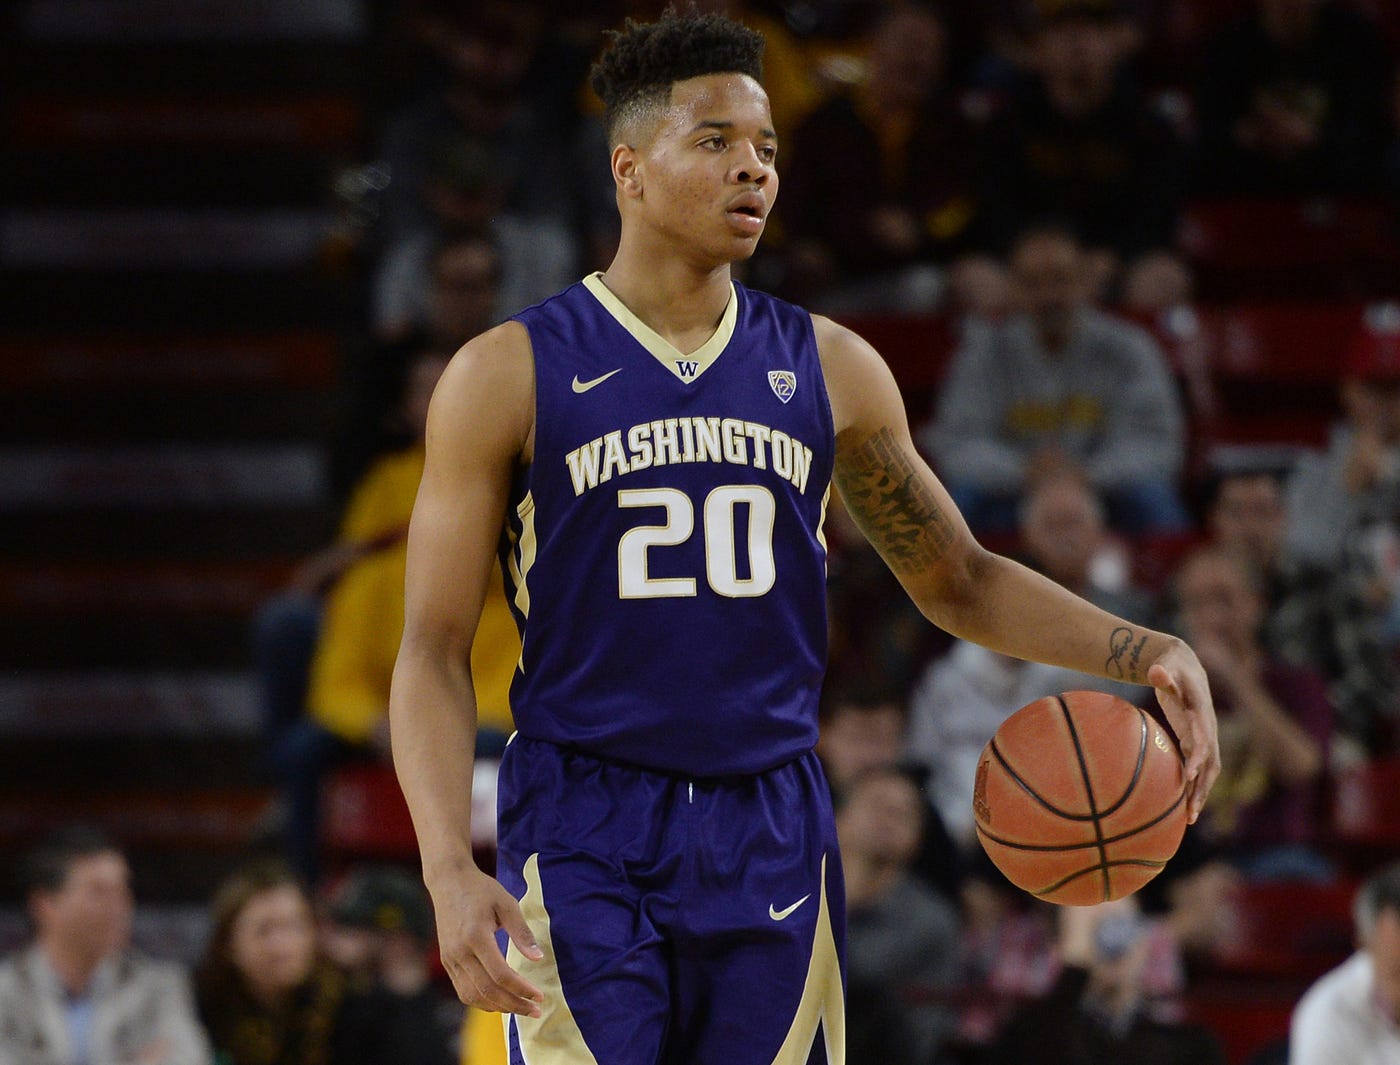 DraftExpress - Who is Markelle Fultz?